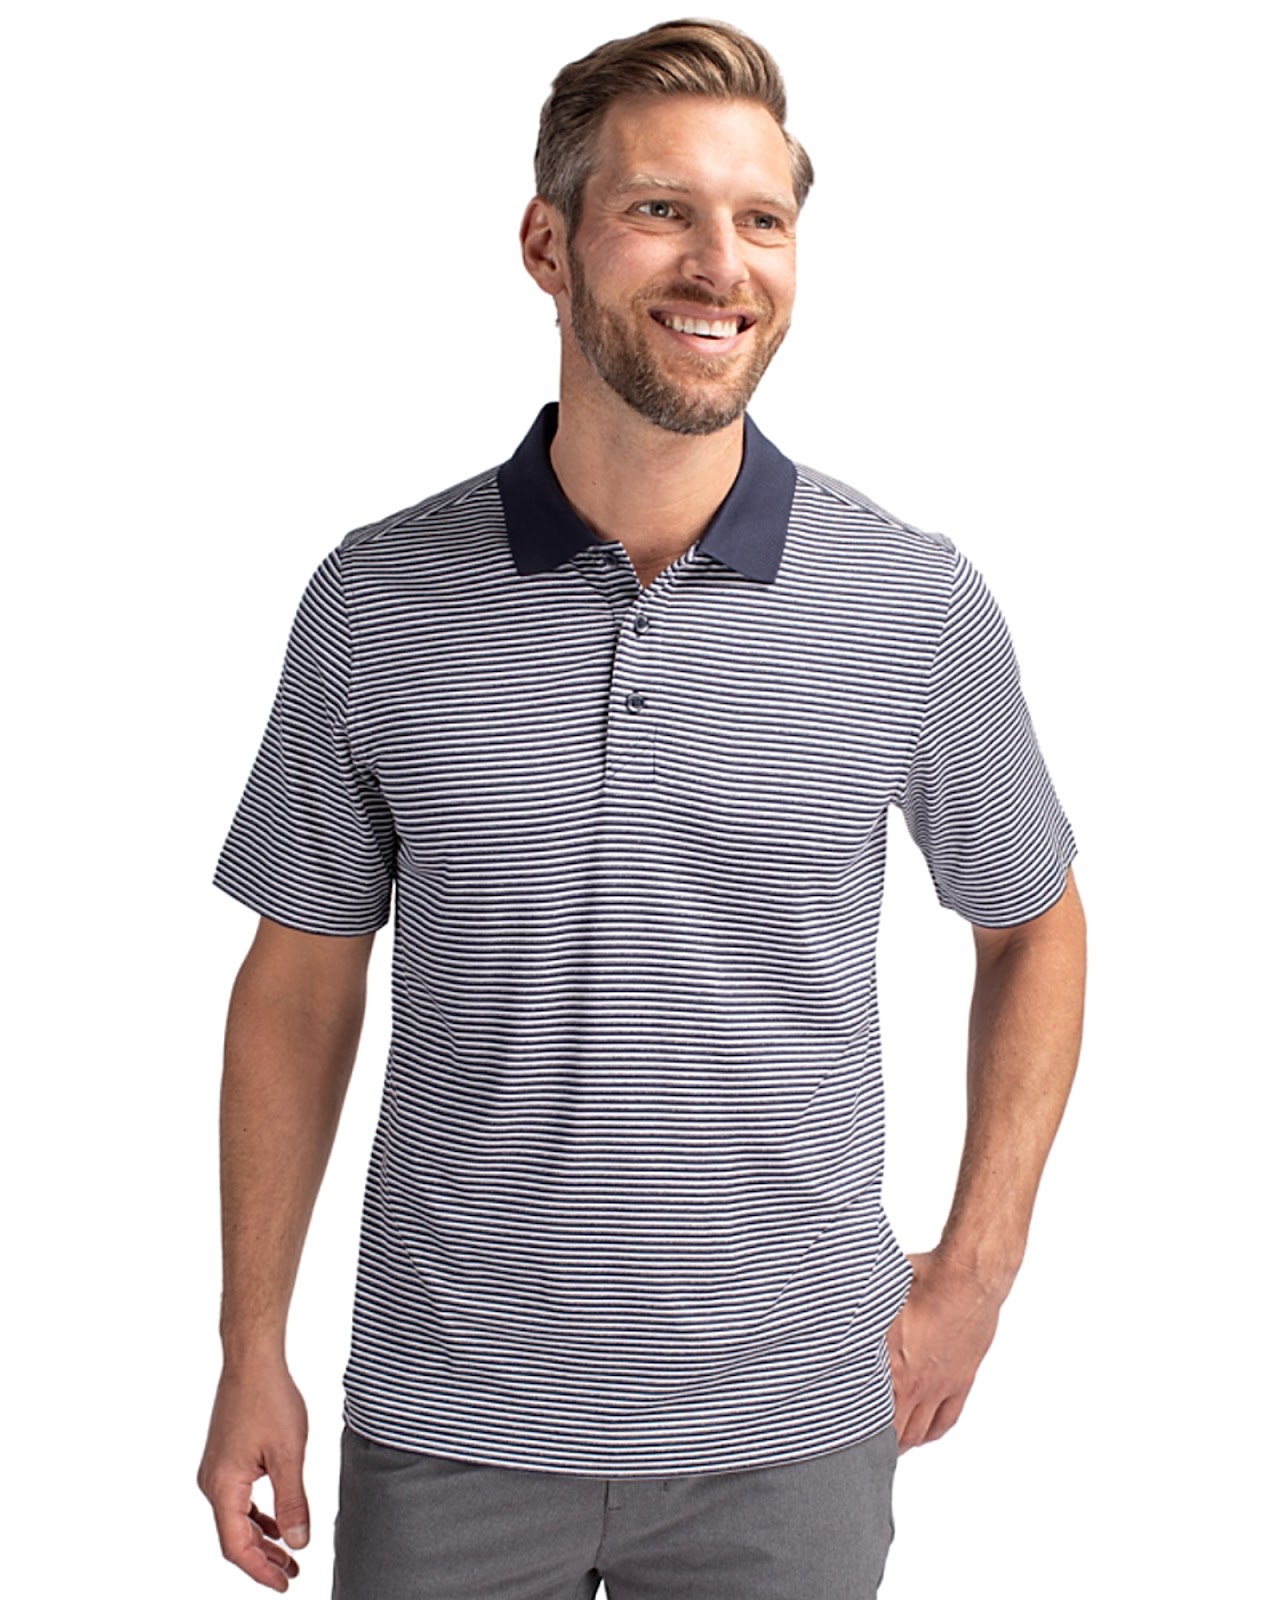 Man wearing Cutter & Buck Forge Tonal Stripe Stretch Mens Big and Tall Polo in Polished/Grey